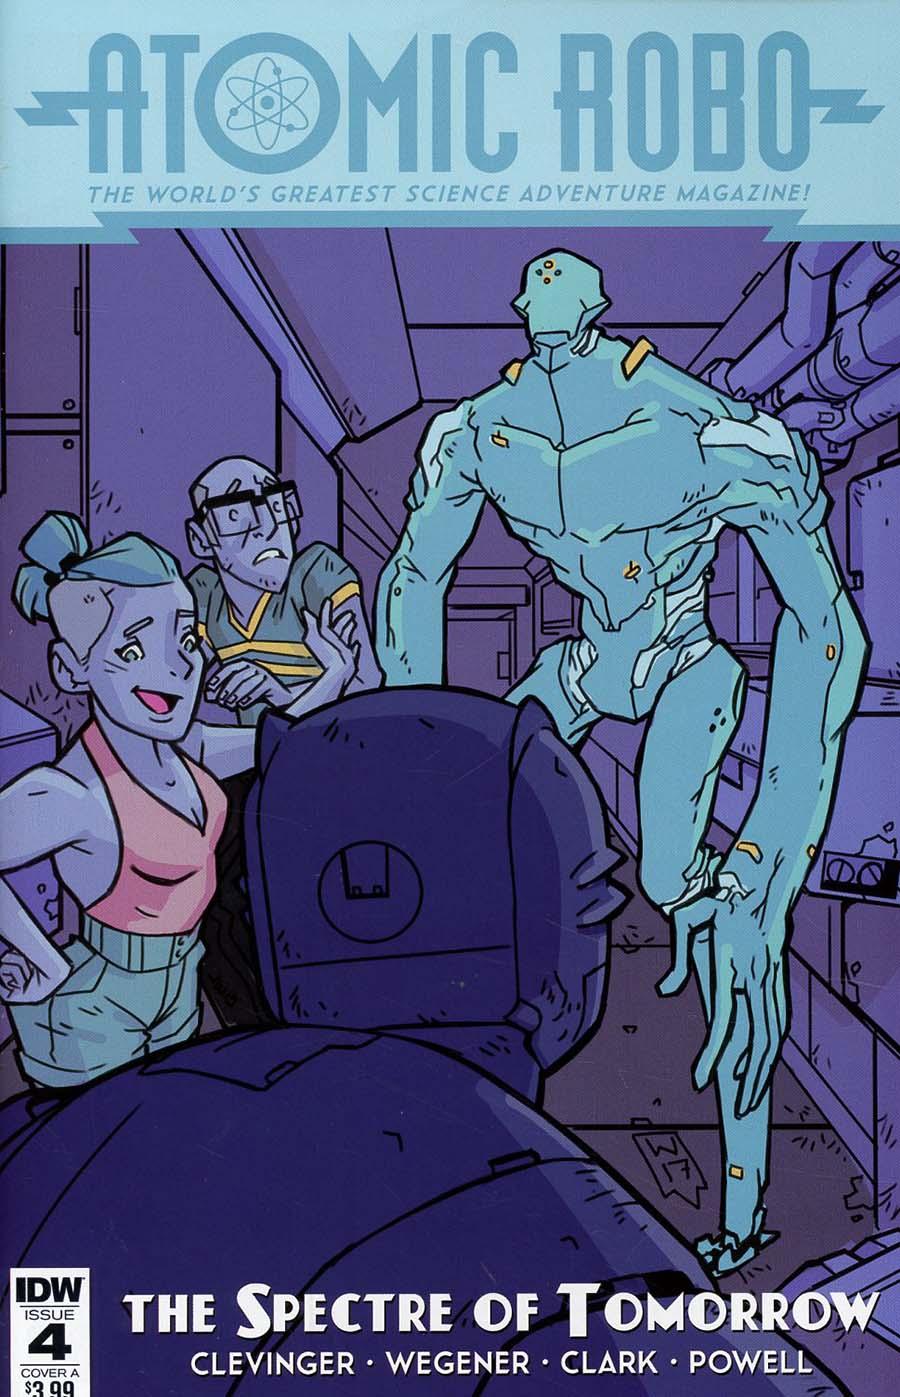 Atomic Robo And The Spectre Of Tomorrow Vol. 1 #4